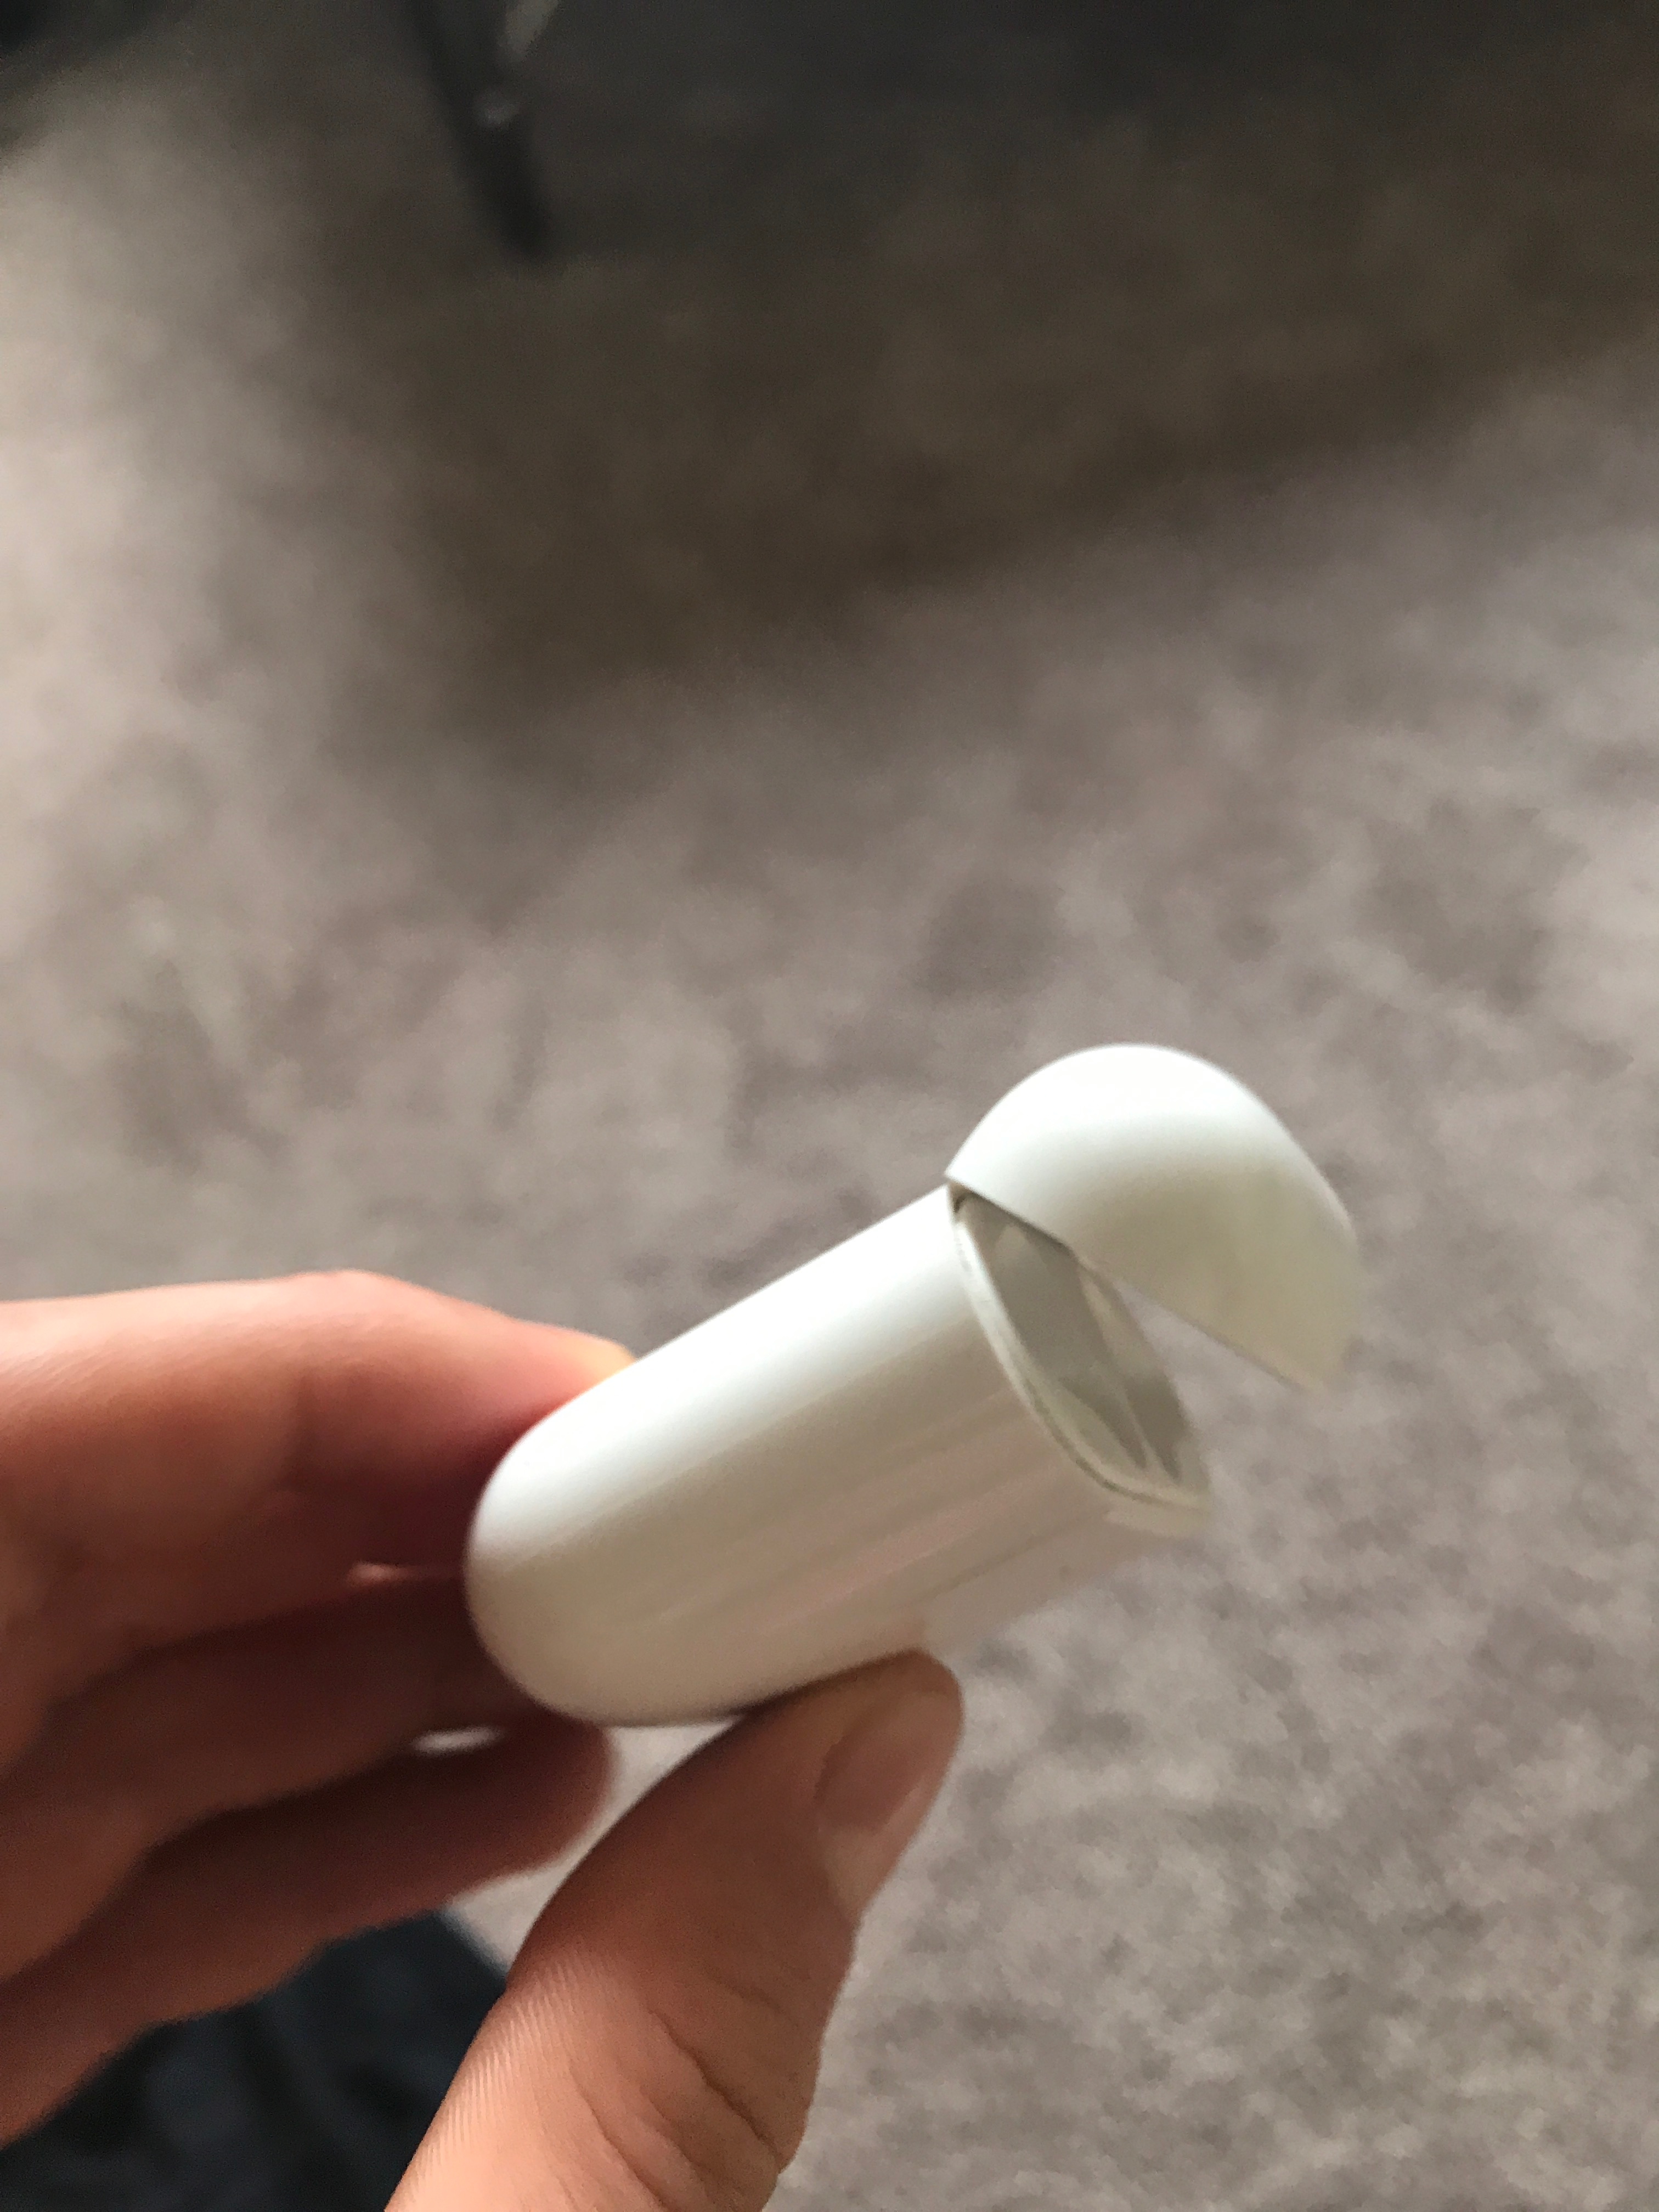 AirPod is very stiff, I have to use - Apple Community